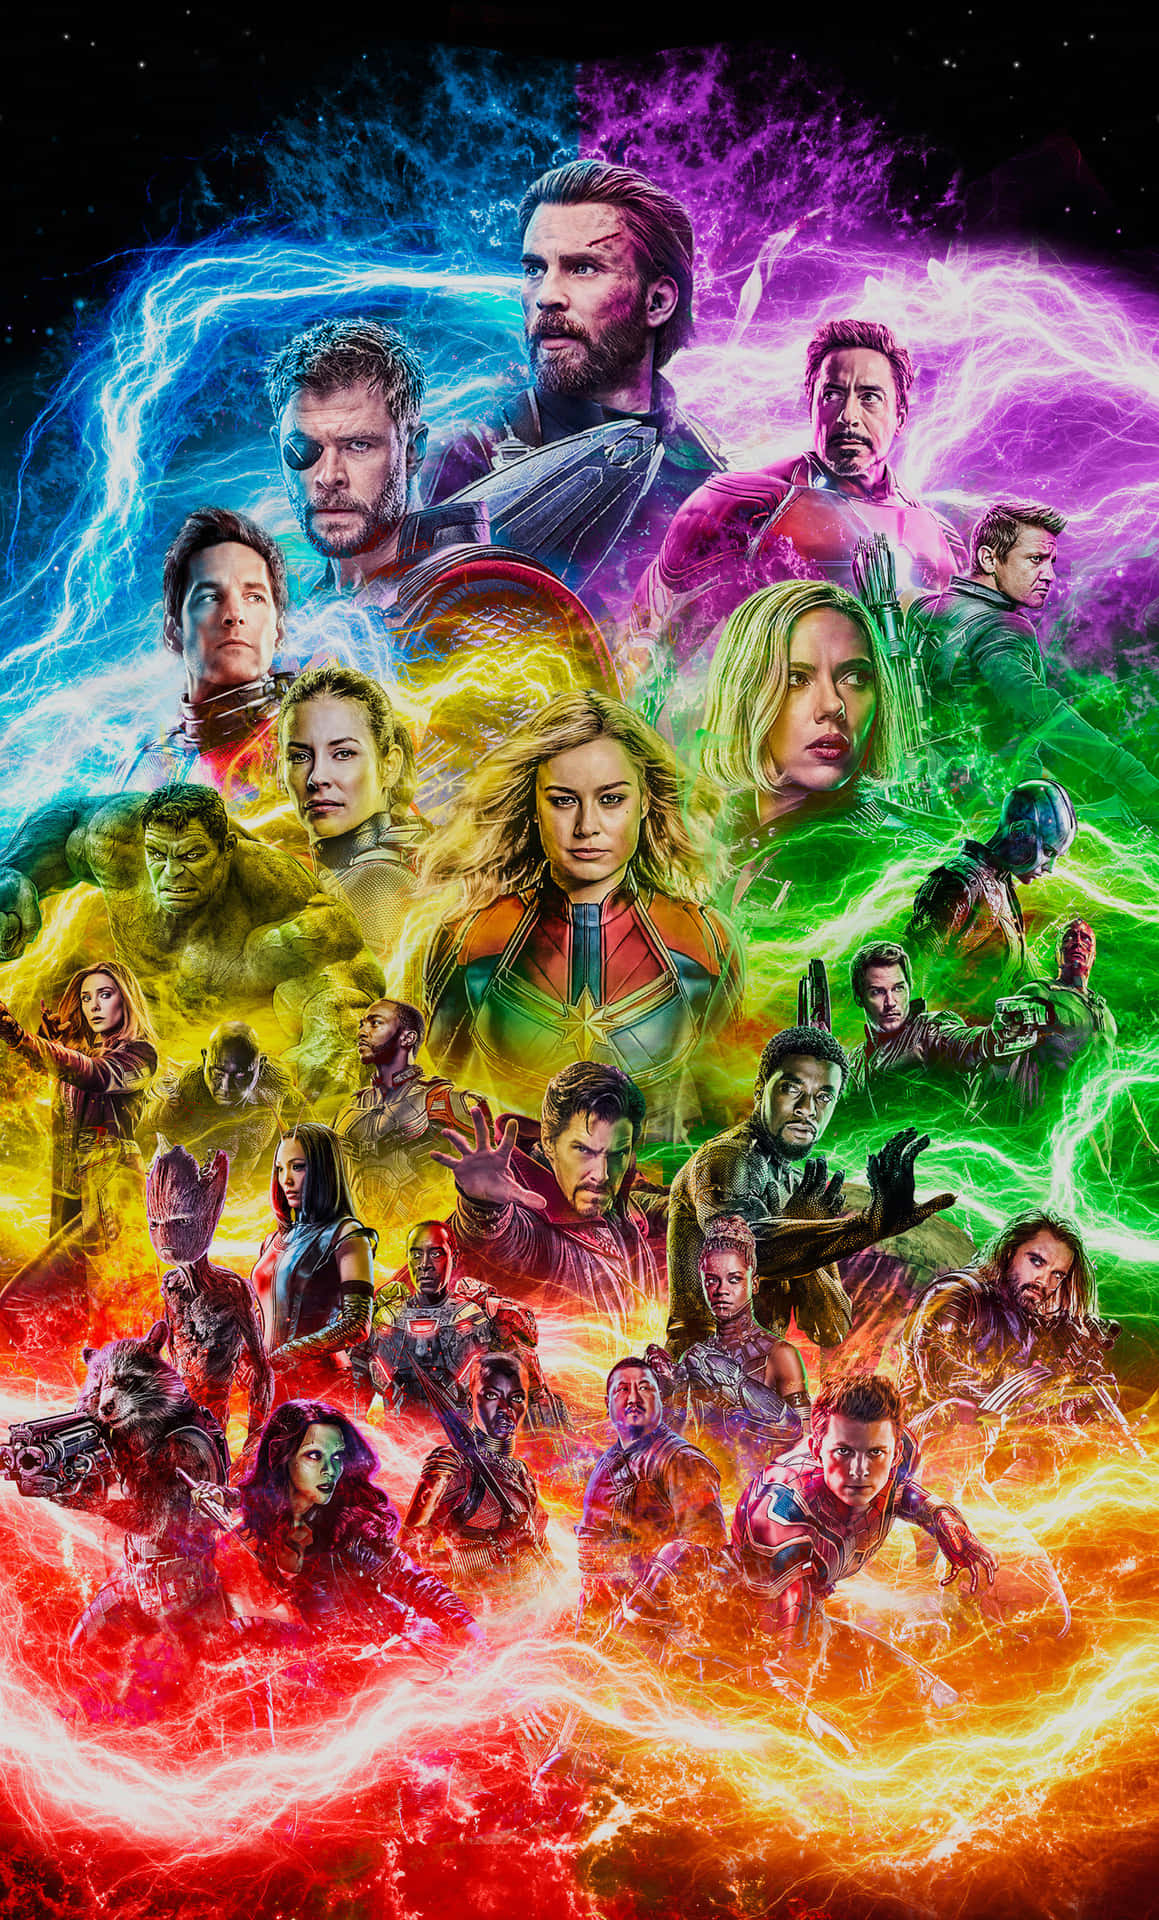 The Epic Finale - Avengers: Endgame Heroes